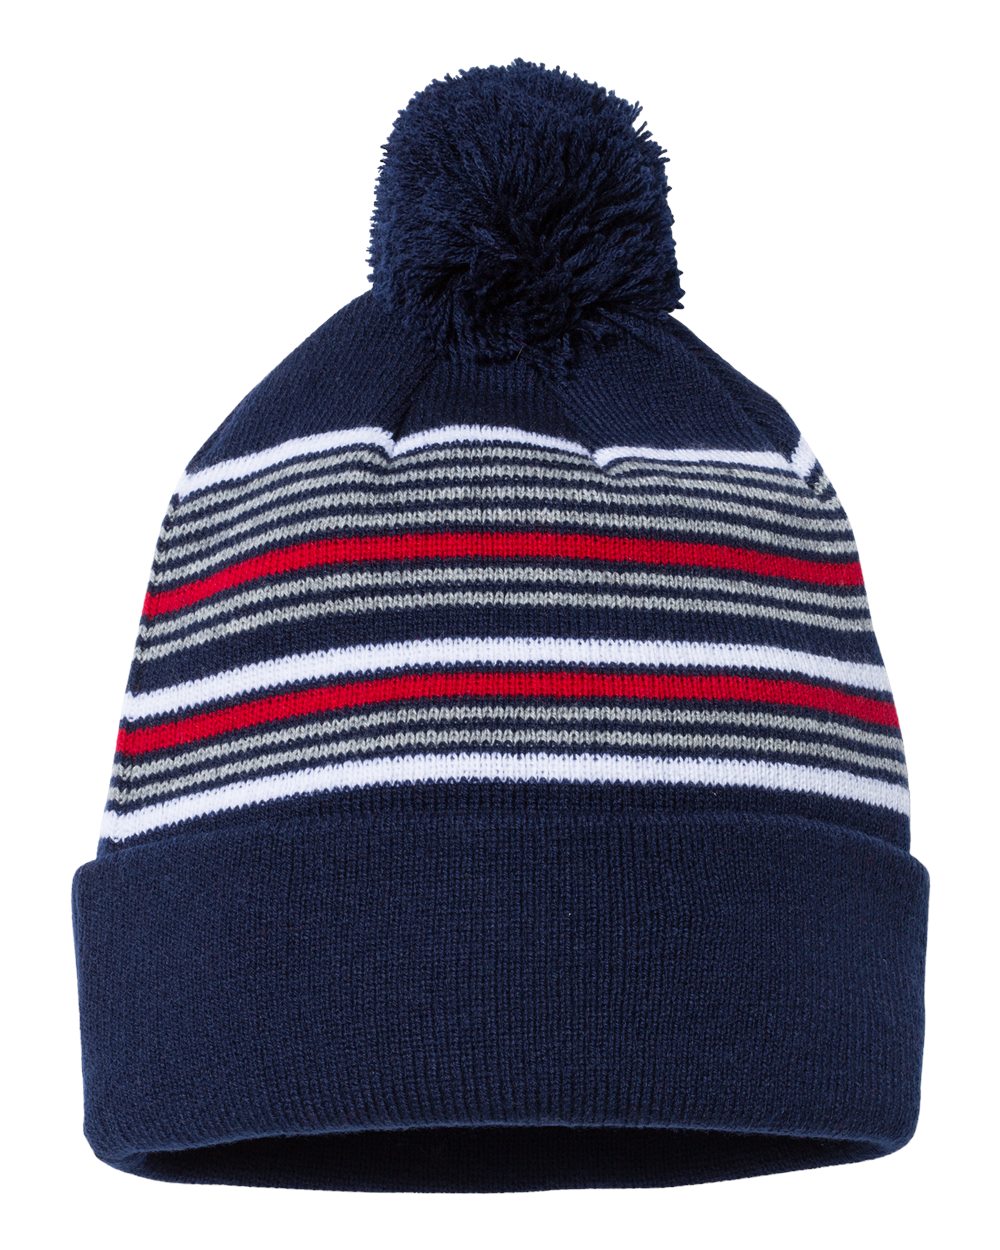 click to view Navy/ White/ Grey/ Red